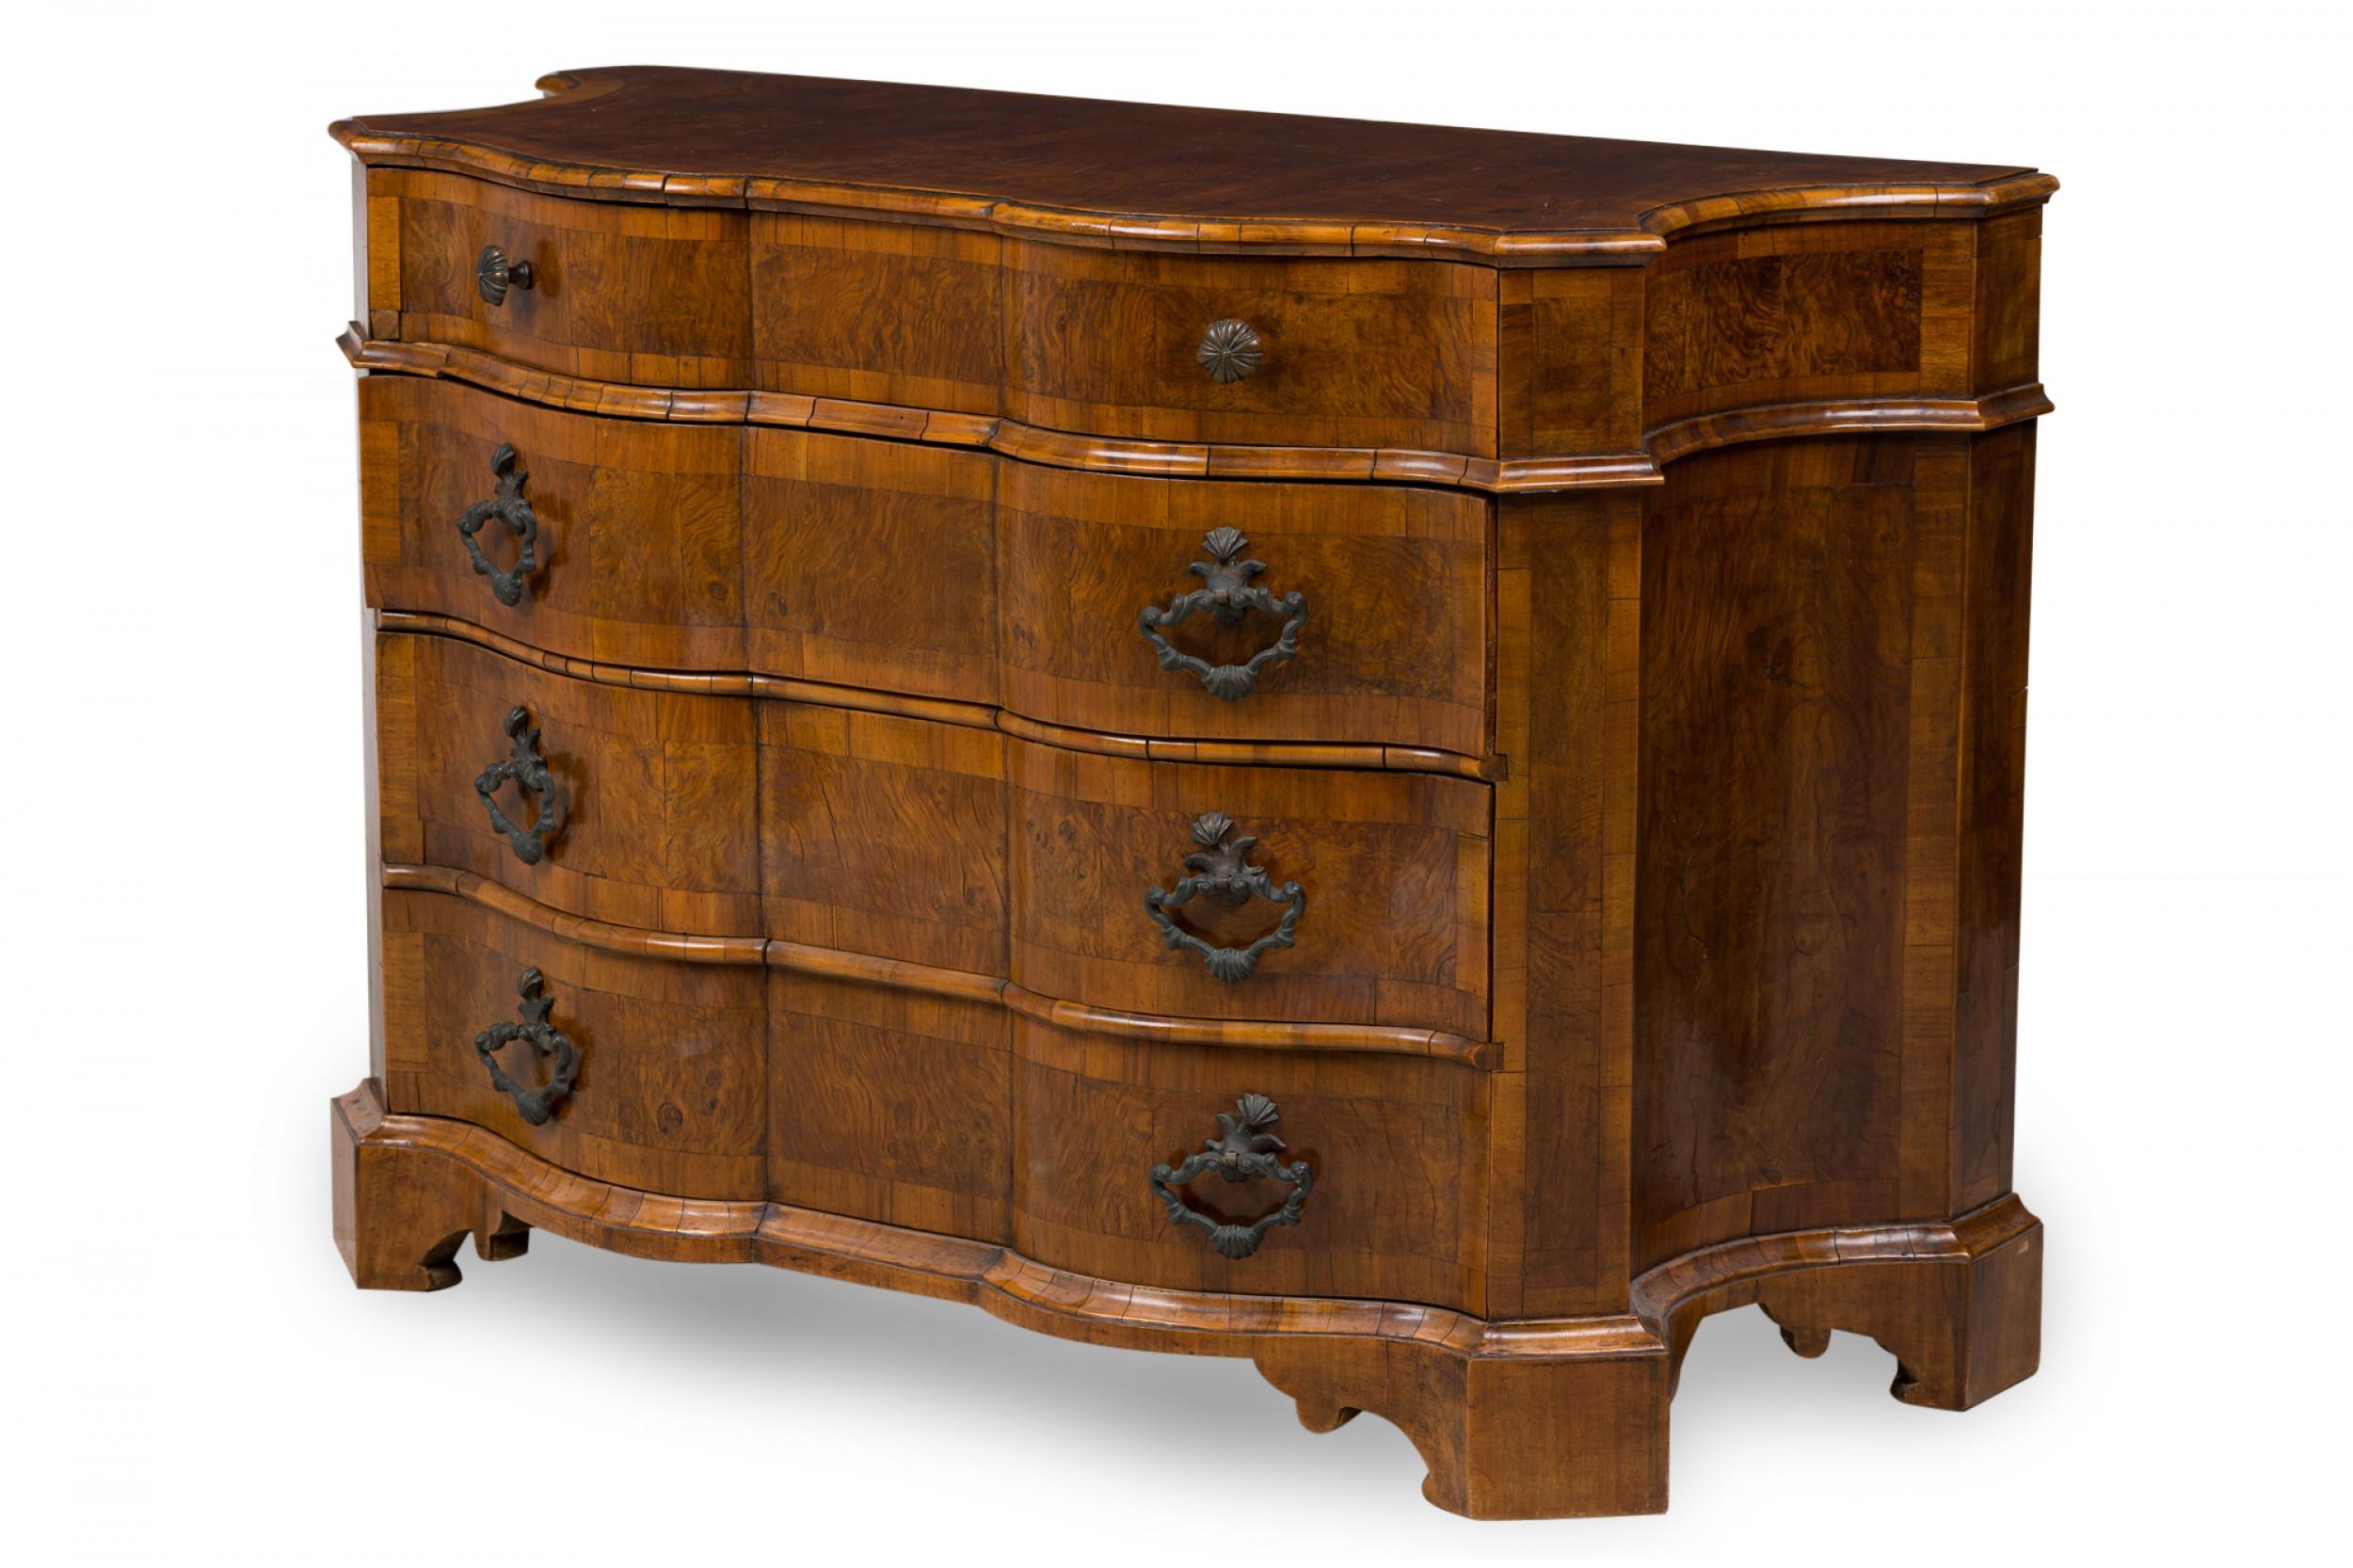 Italian Venetian (18th century) olive wood chest with a serpentine front and shaped top, containing four drawers with patinated bronze drawer pulls.